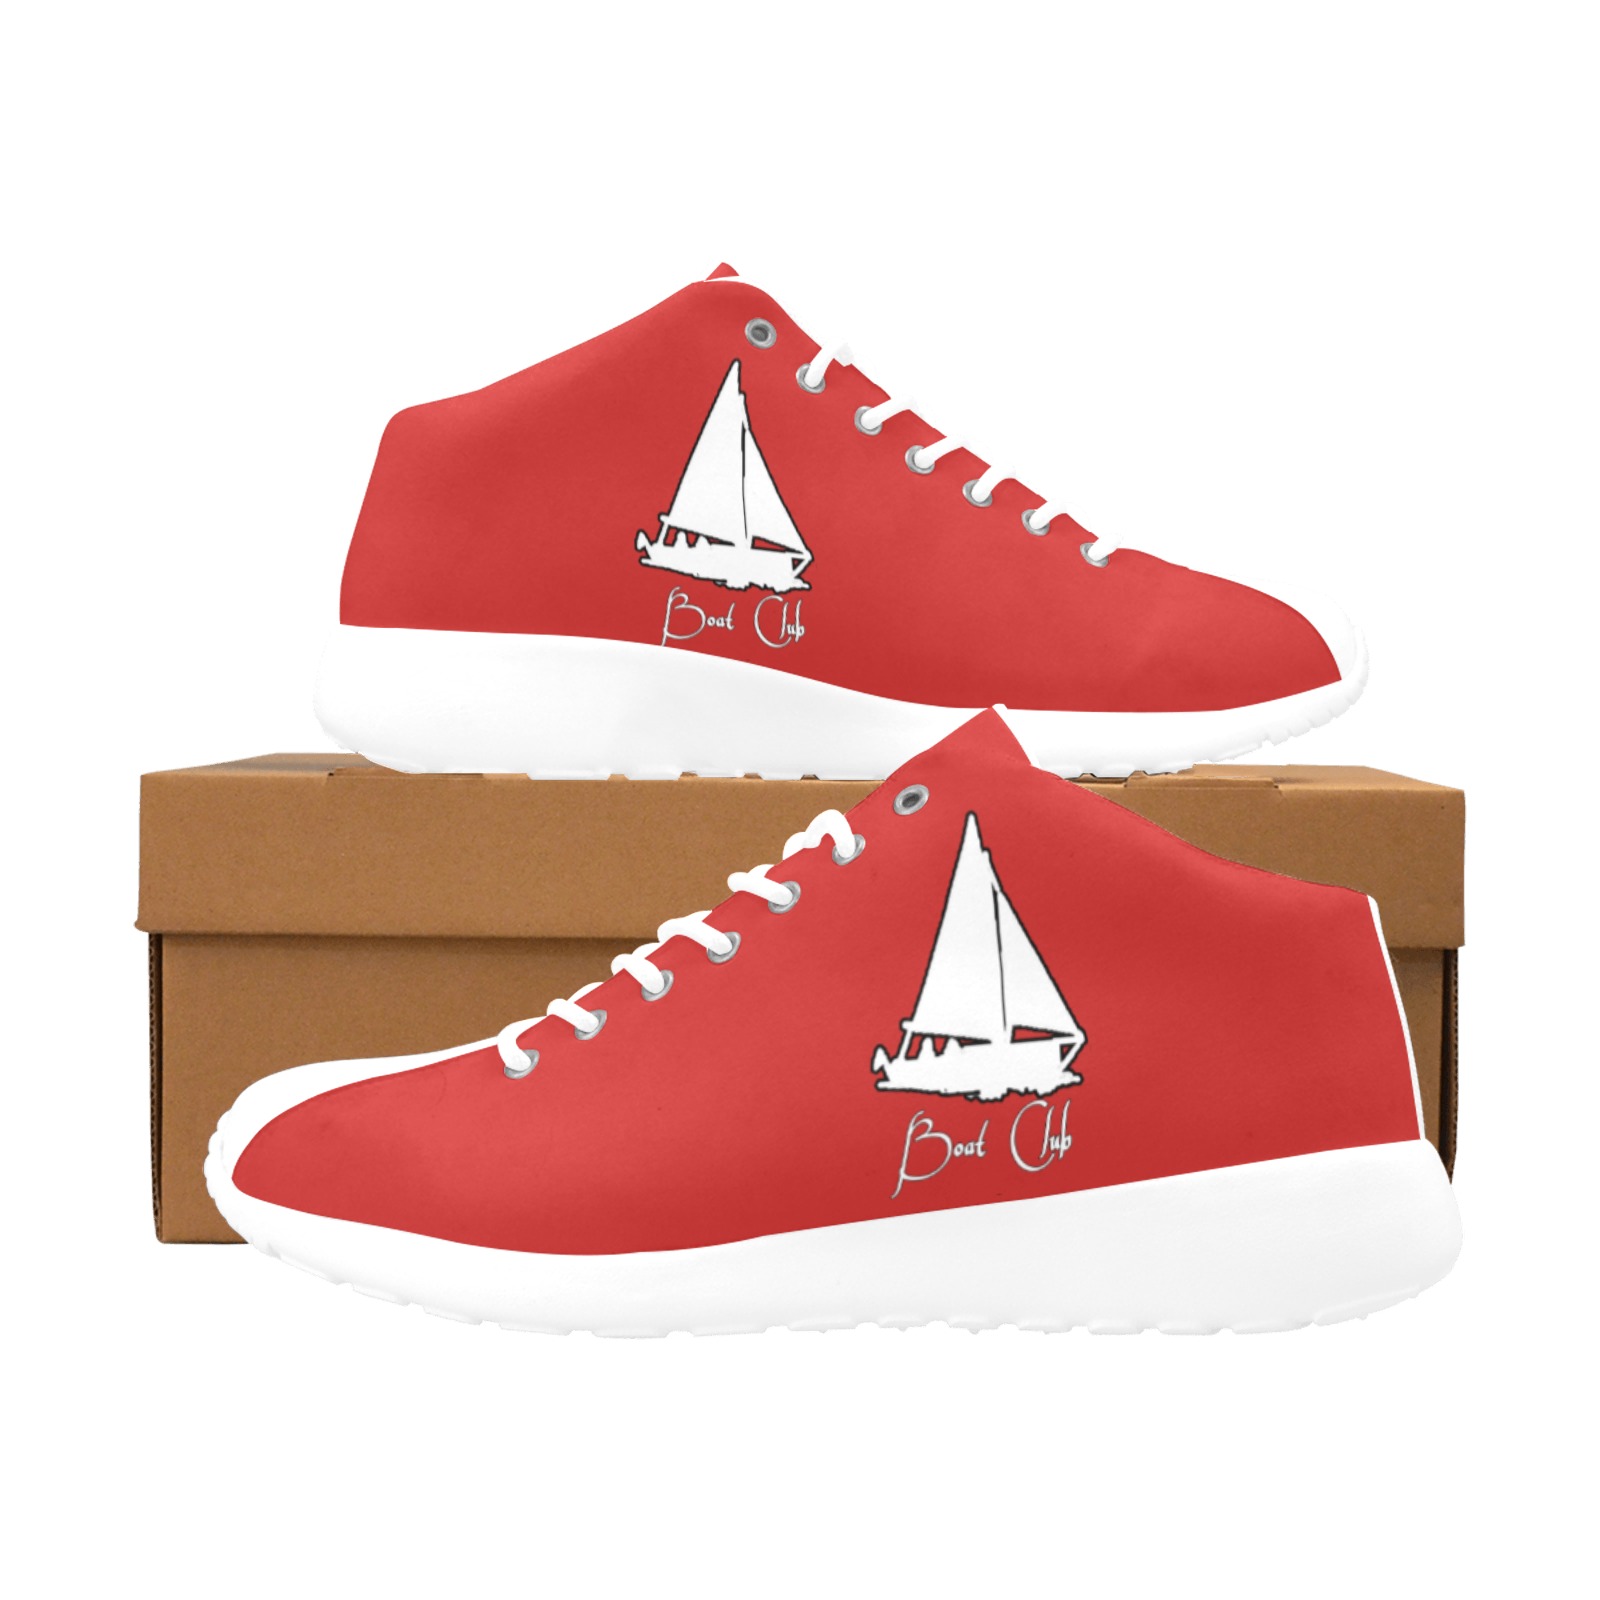 Boat Club Cruise Red Women's Basketball Training Shoes (Model 47502)